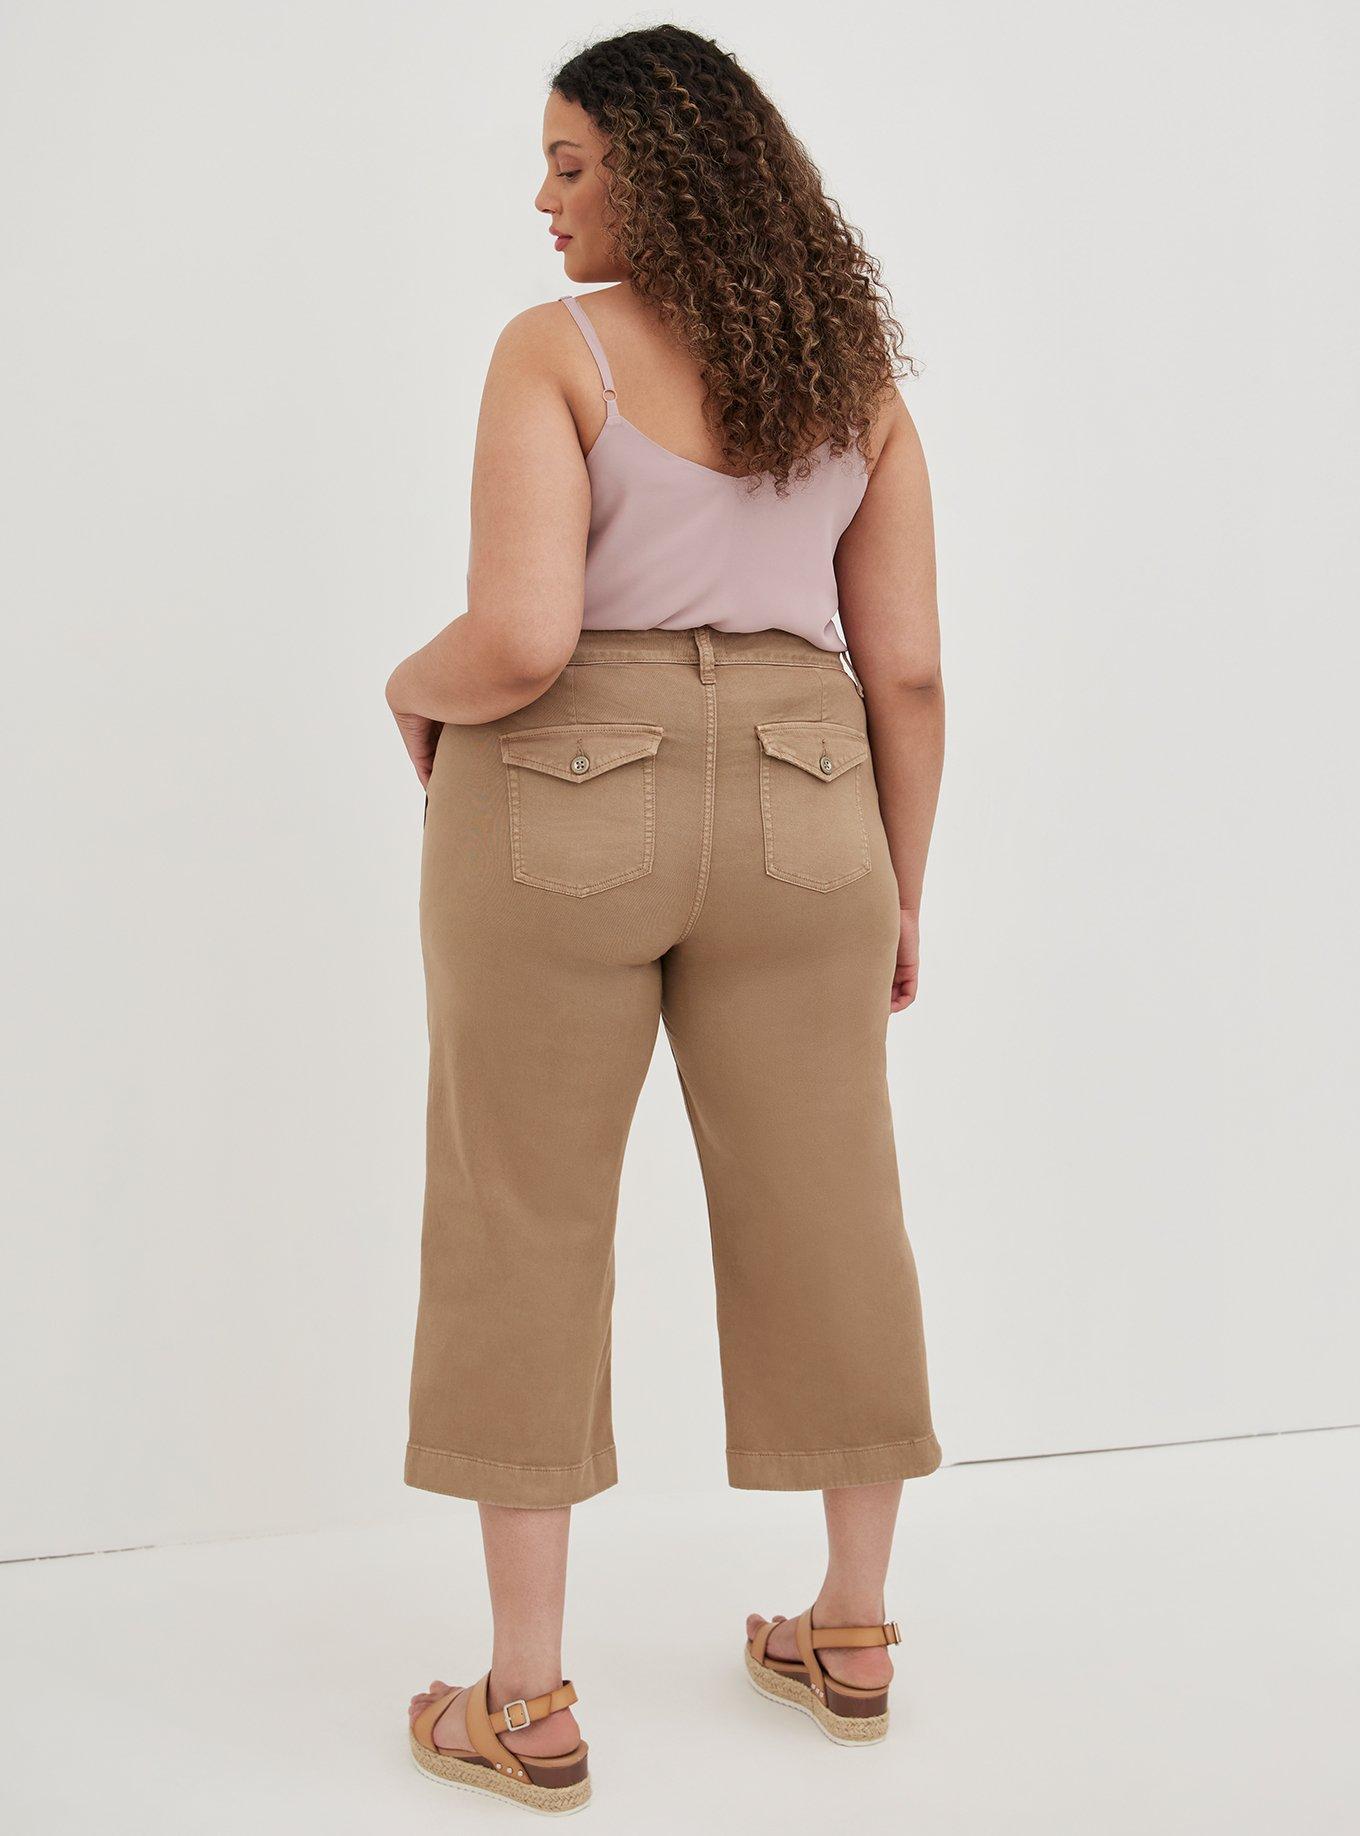 NEW! Stretch Twill Pants, NEW! NEW! NEW! These pull-on Stretch Twill  Cropped Wide Leg Pants are a spring must-have.